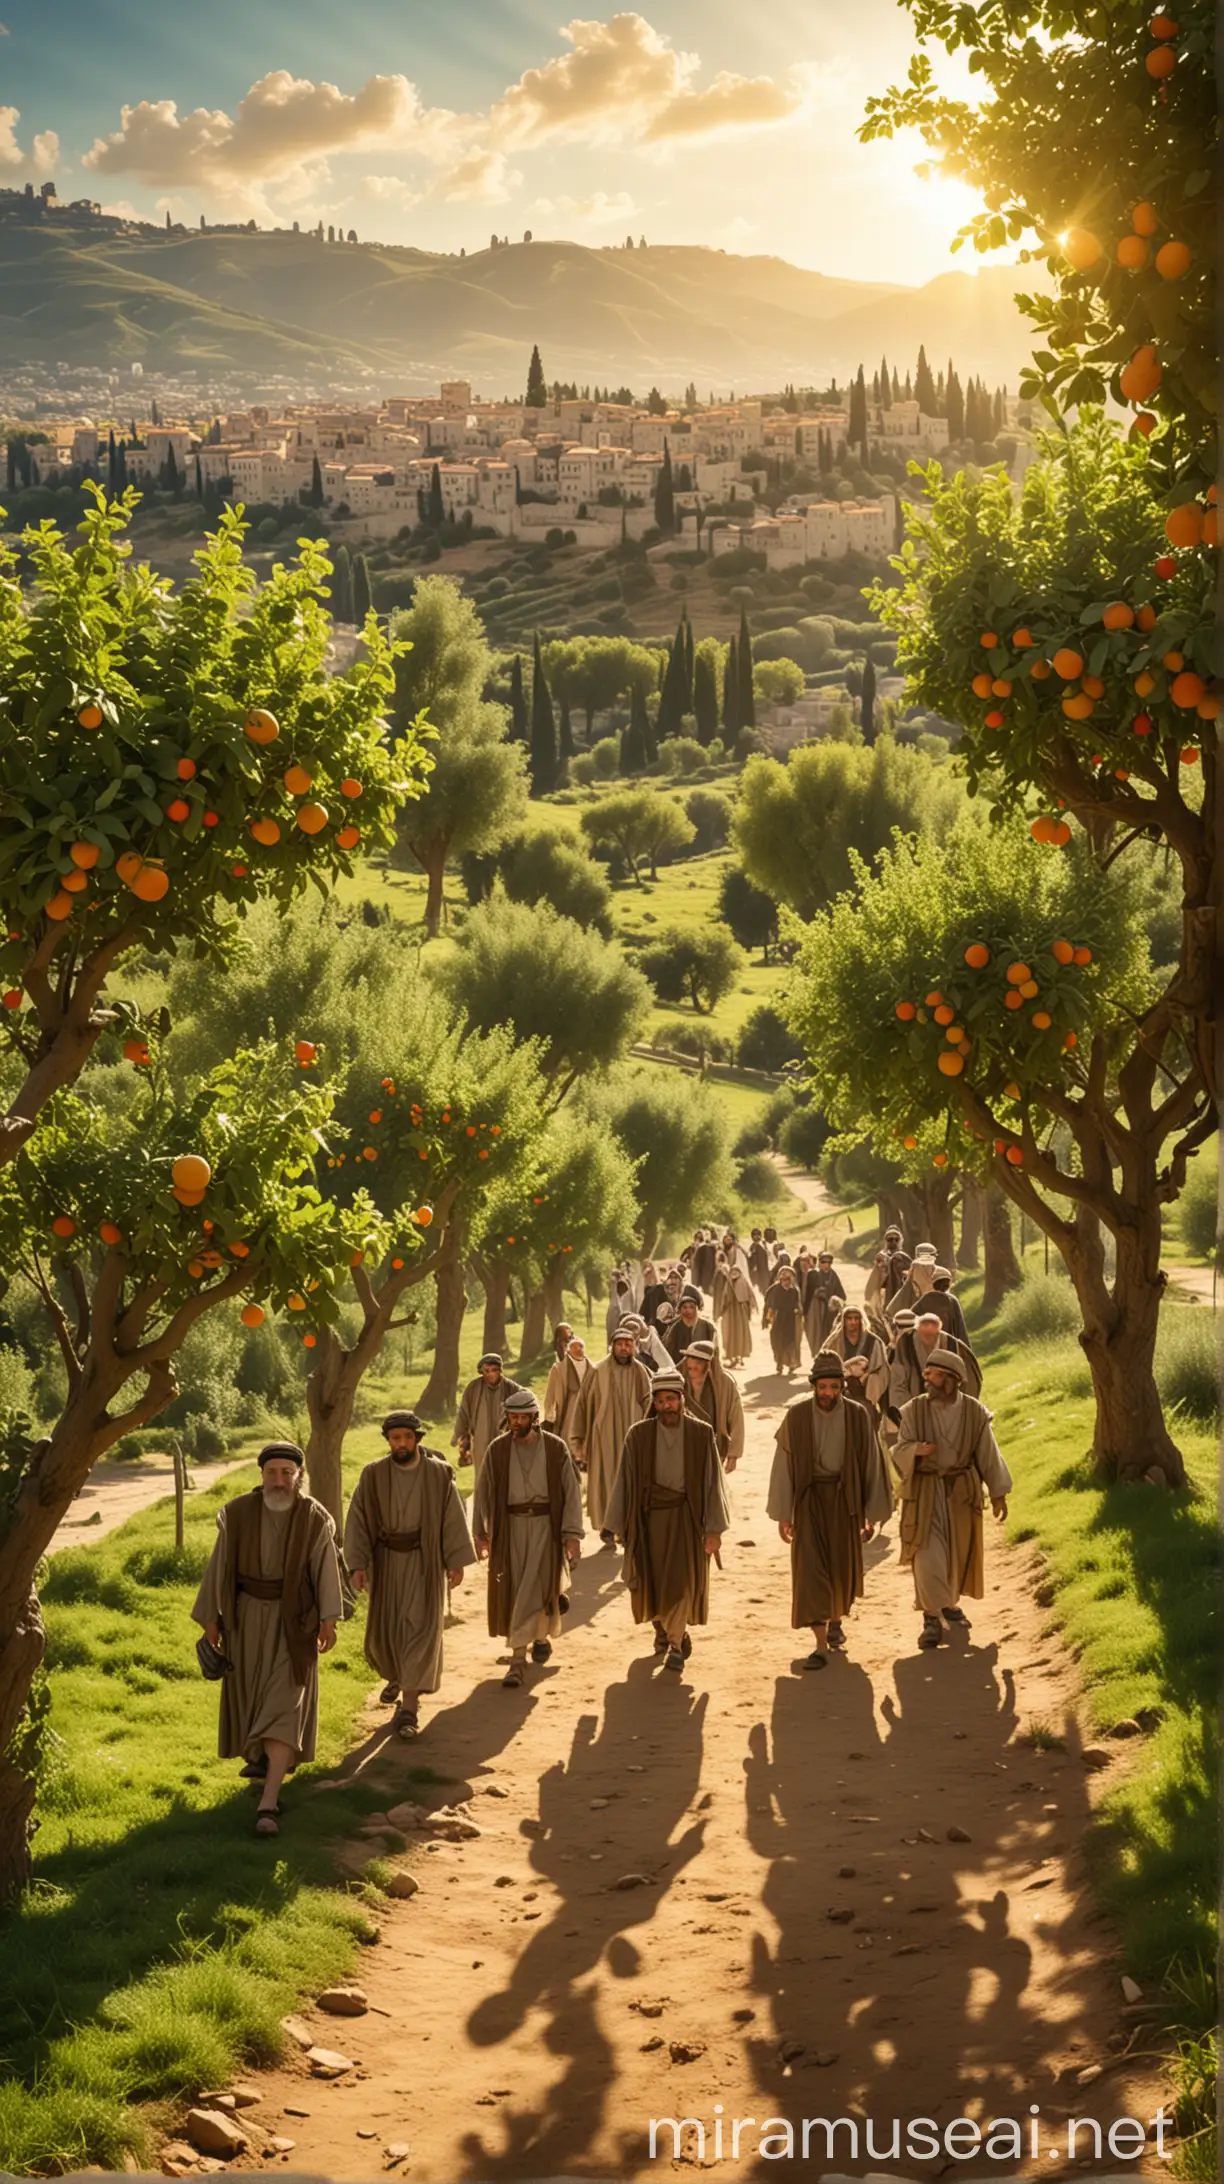 Ancient Jewish People Walking Through Lush Green Valley with Fruit Trees and Cityscape Under Bright Sun